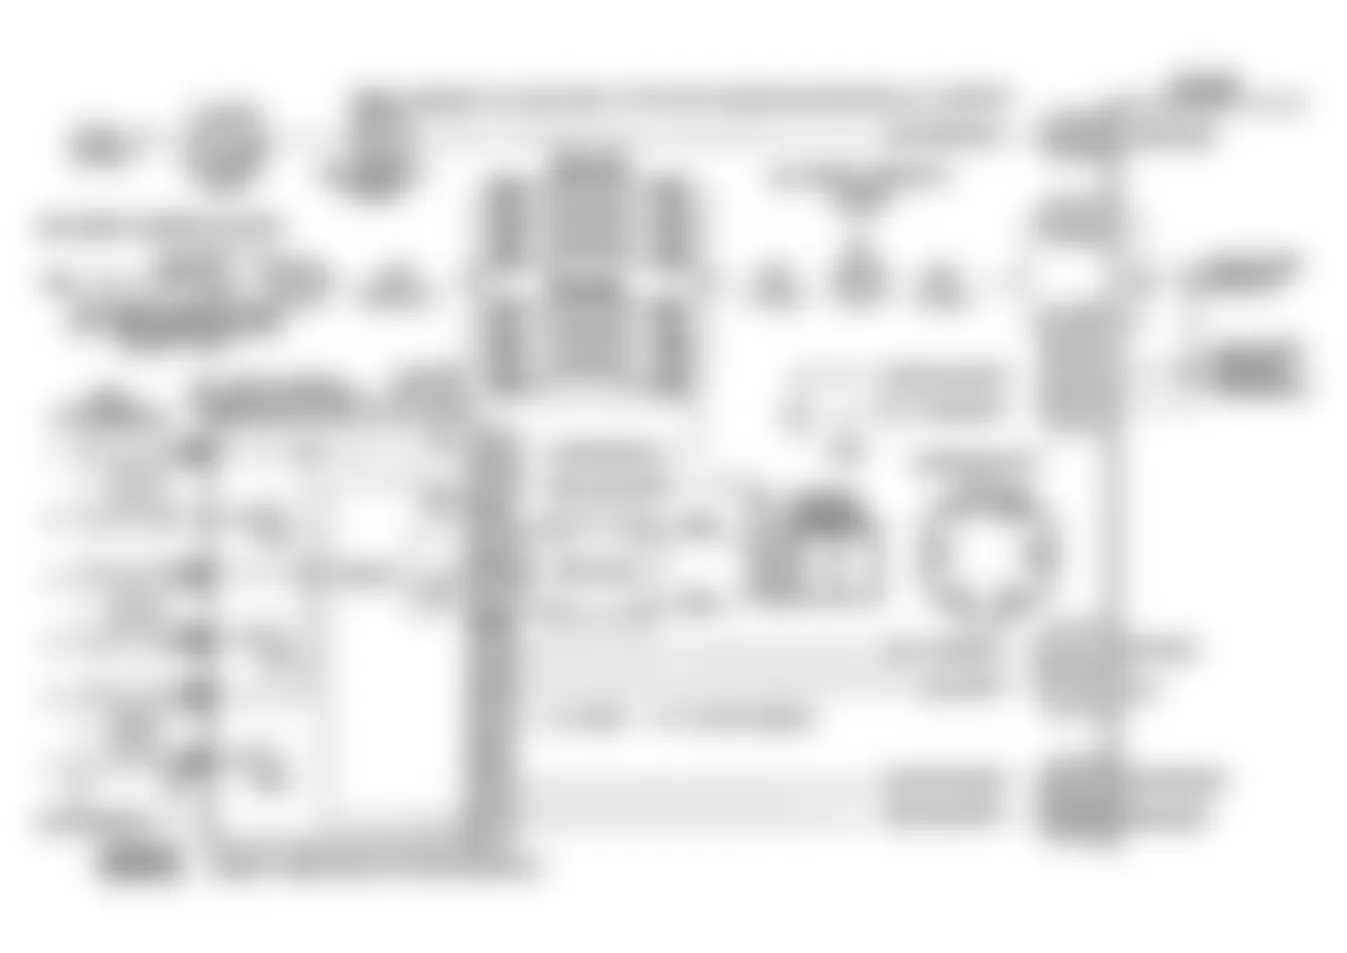 Buick Regal Limited 1993 - Component Locations -  Code 42 Schematic (3.1L W Body (Exc. Calif.)) EST Circuit Open Or Grounded